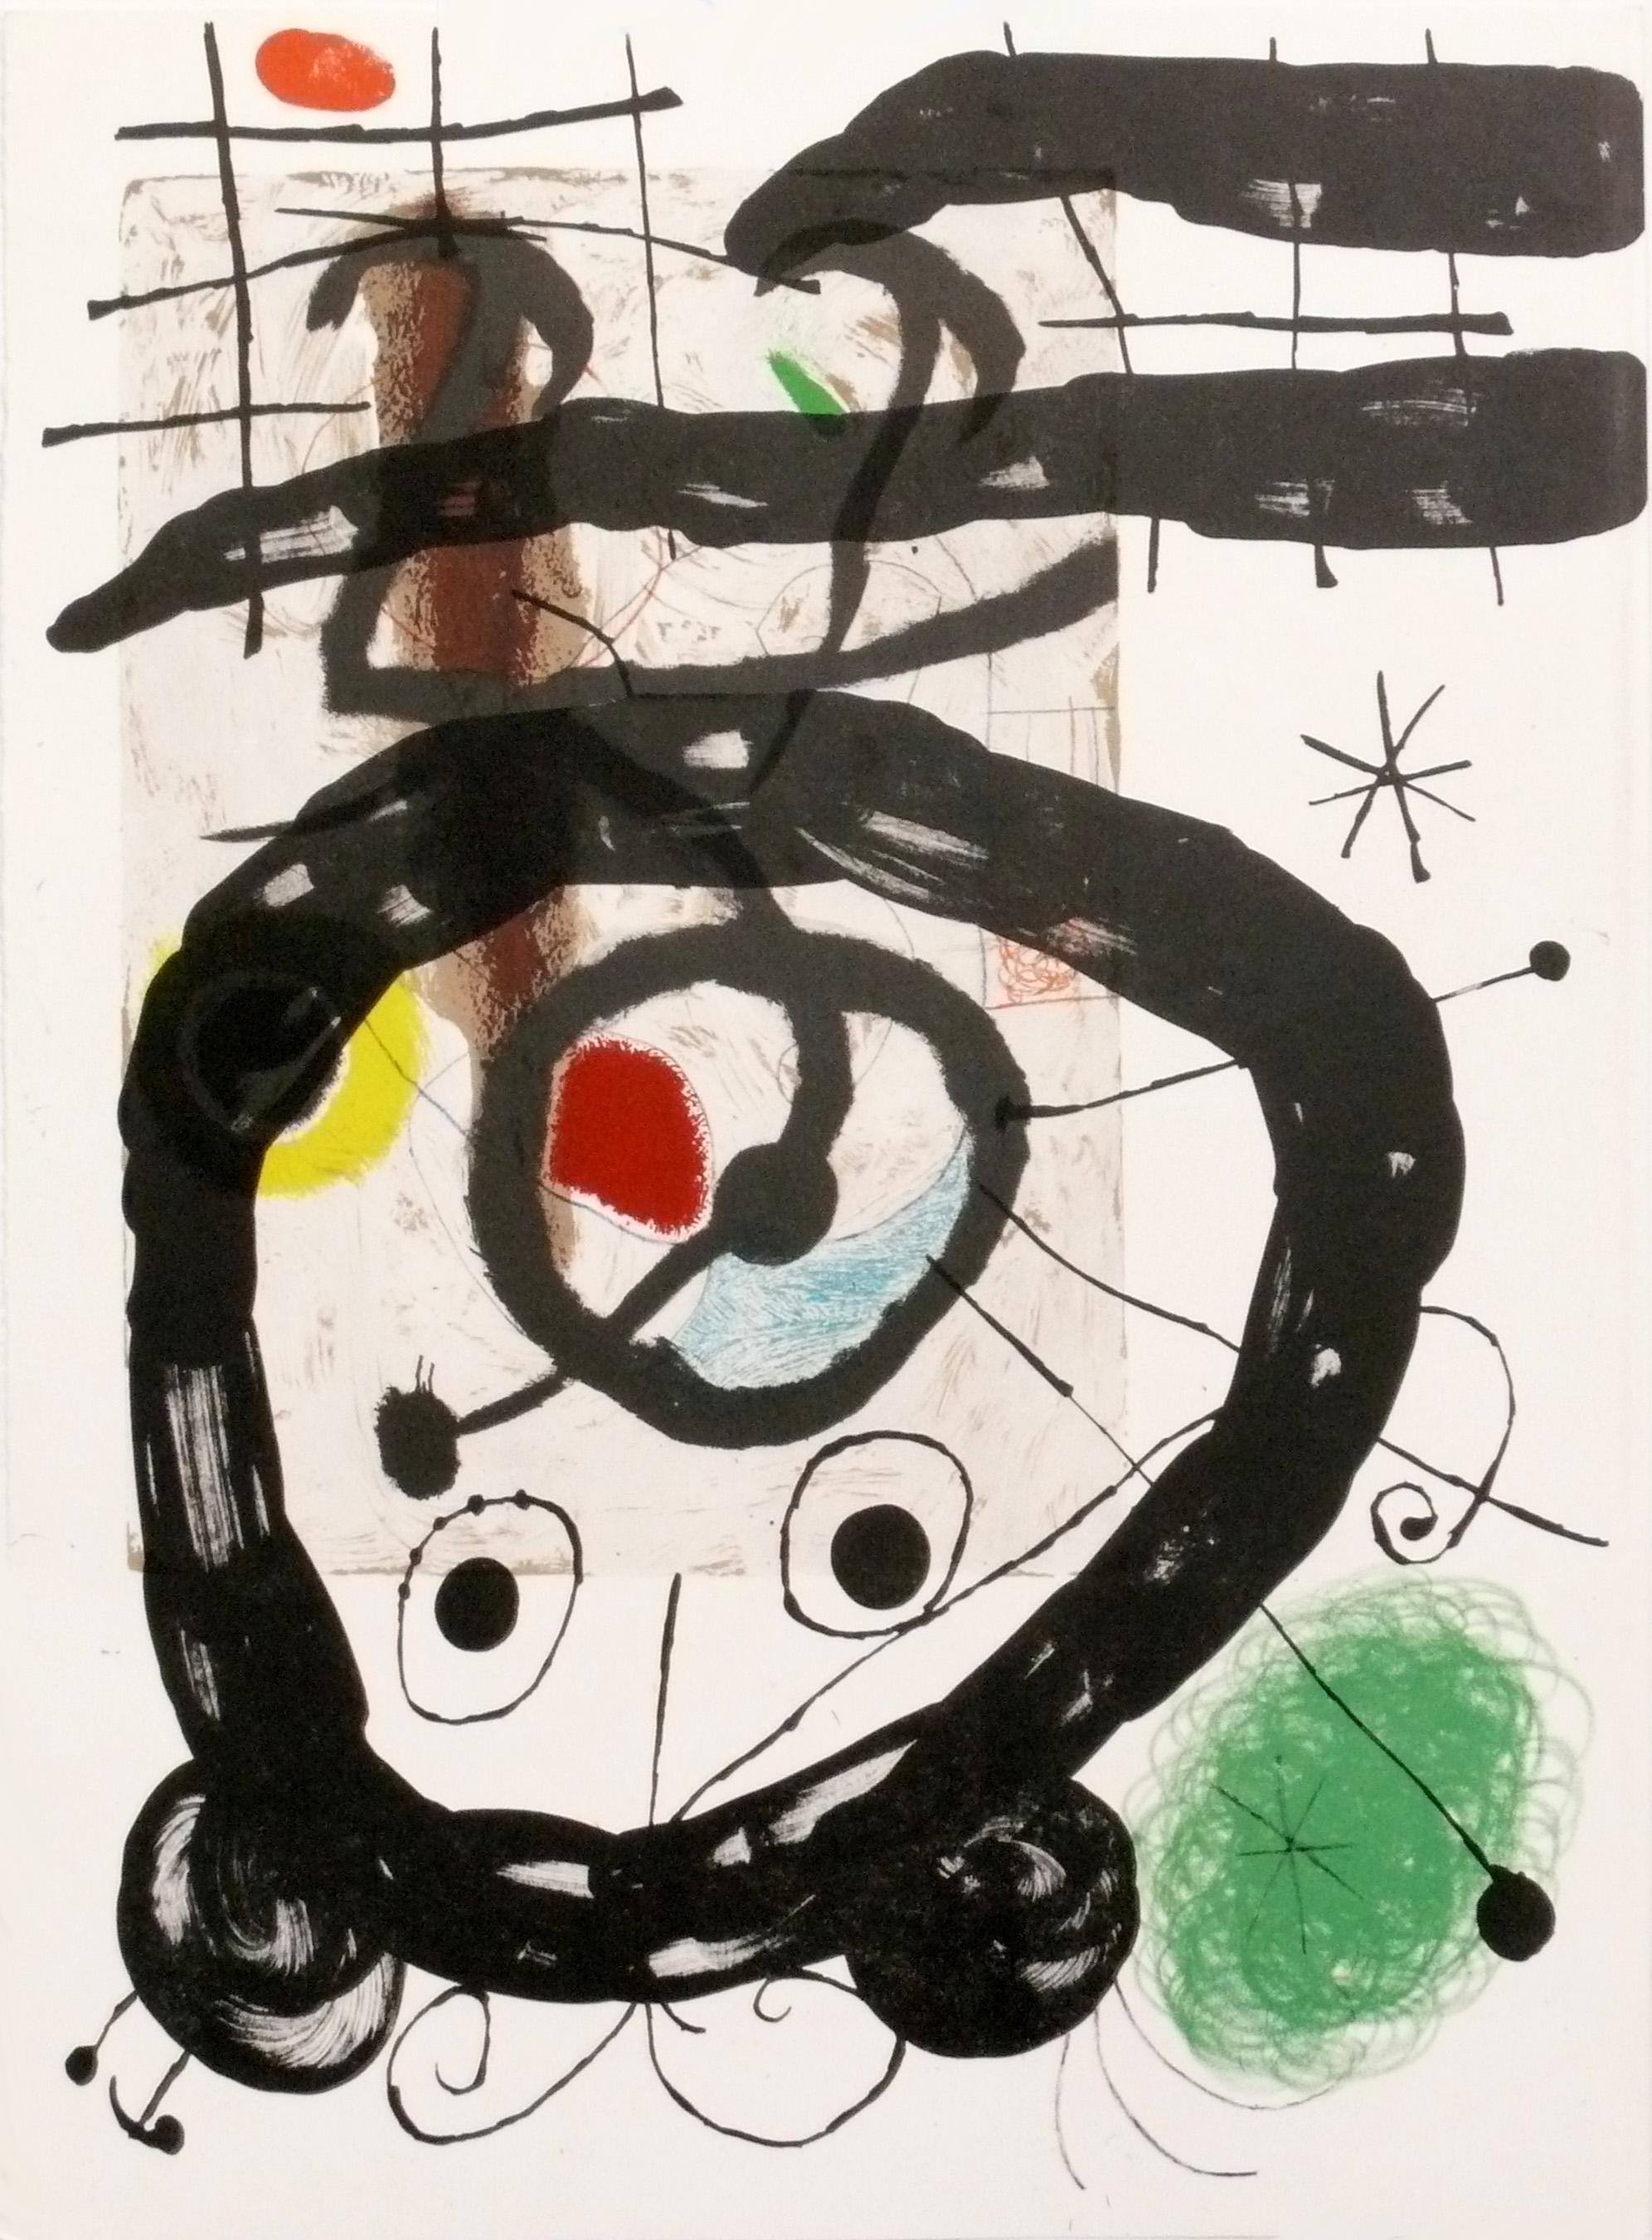 Selection of Joan Miro color lithographs, French, circa 1960s. They are from the limited edition folio “Derriere le Miroir”, published by the legendary Galerie Maeght, circa 1960s. Please see our other 1stdibs listings for more Joan Miro works from